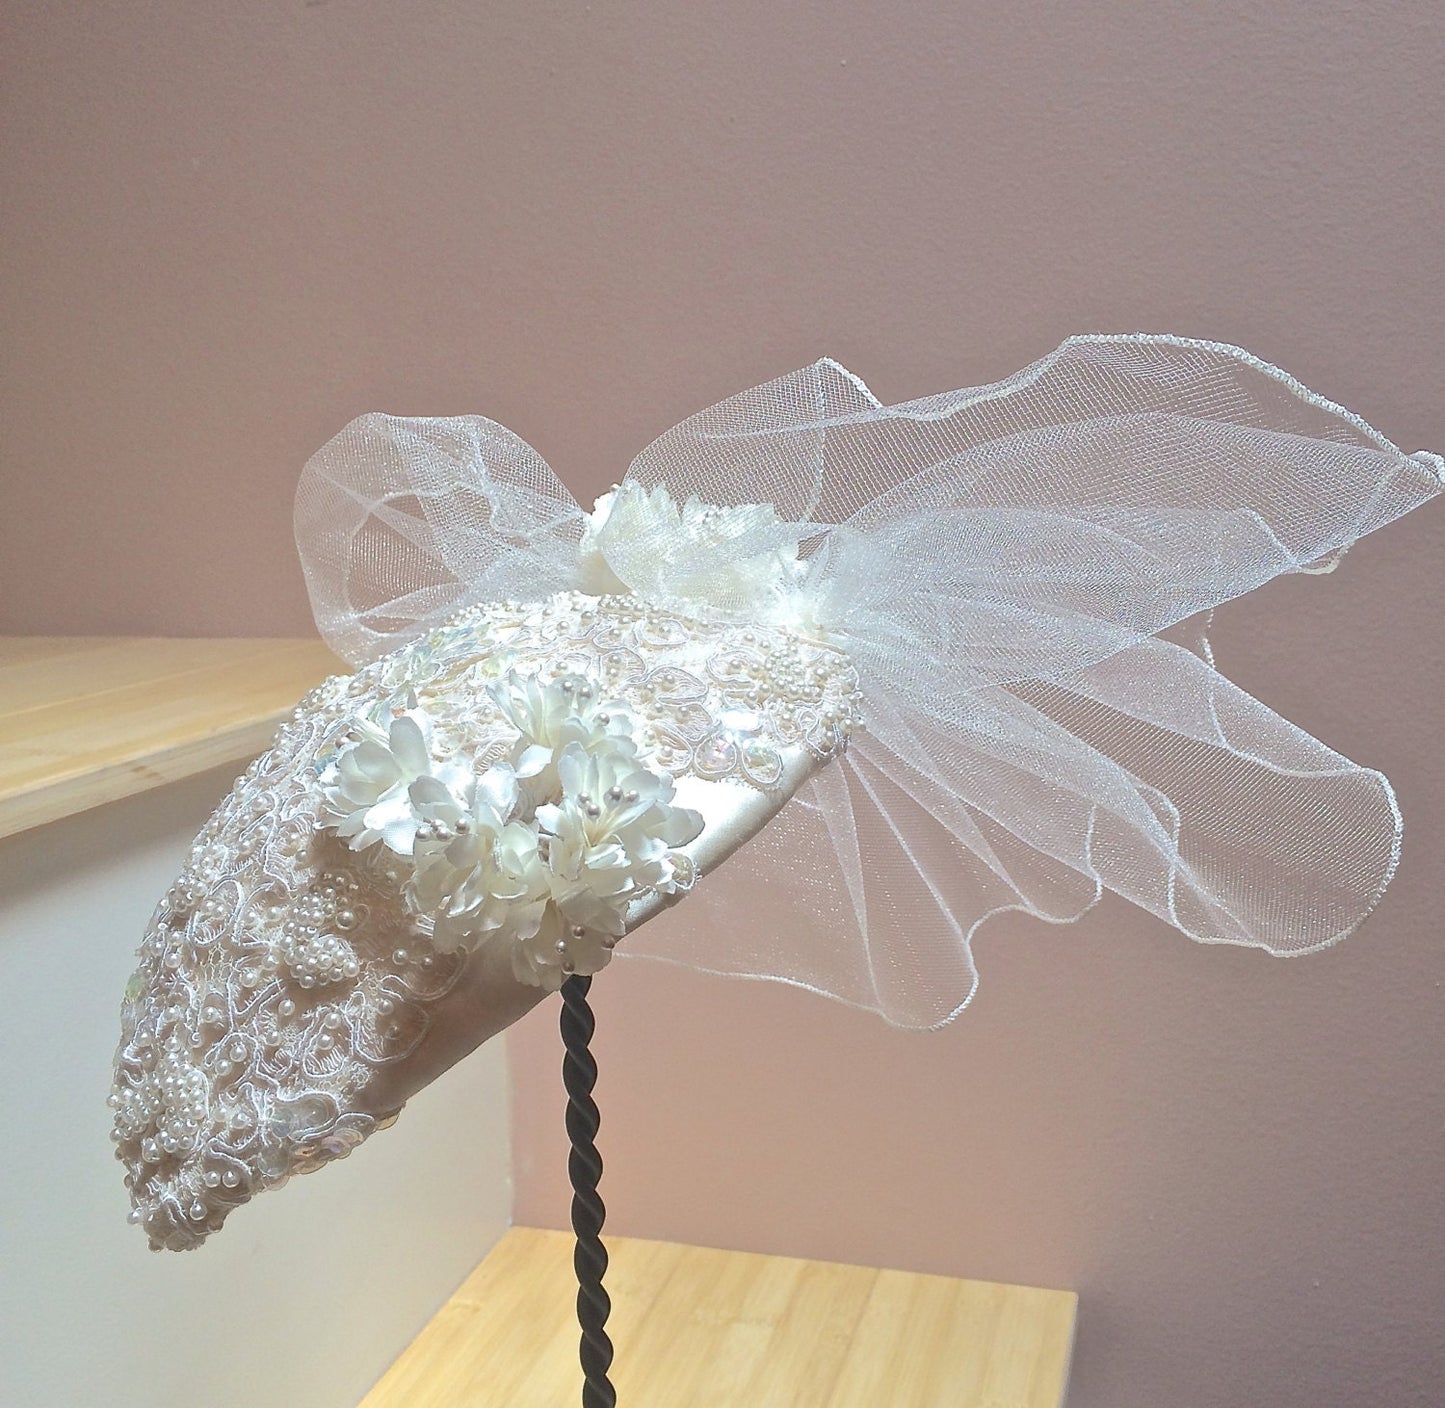 Wedding Hat with pearls and sequins, Satin wedding headpiece, hat with short veil. Ivory Wedding headpiece with Beading and Veiling